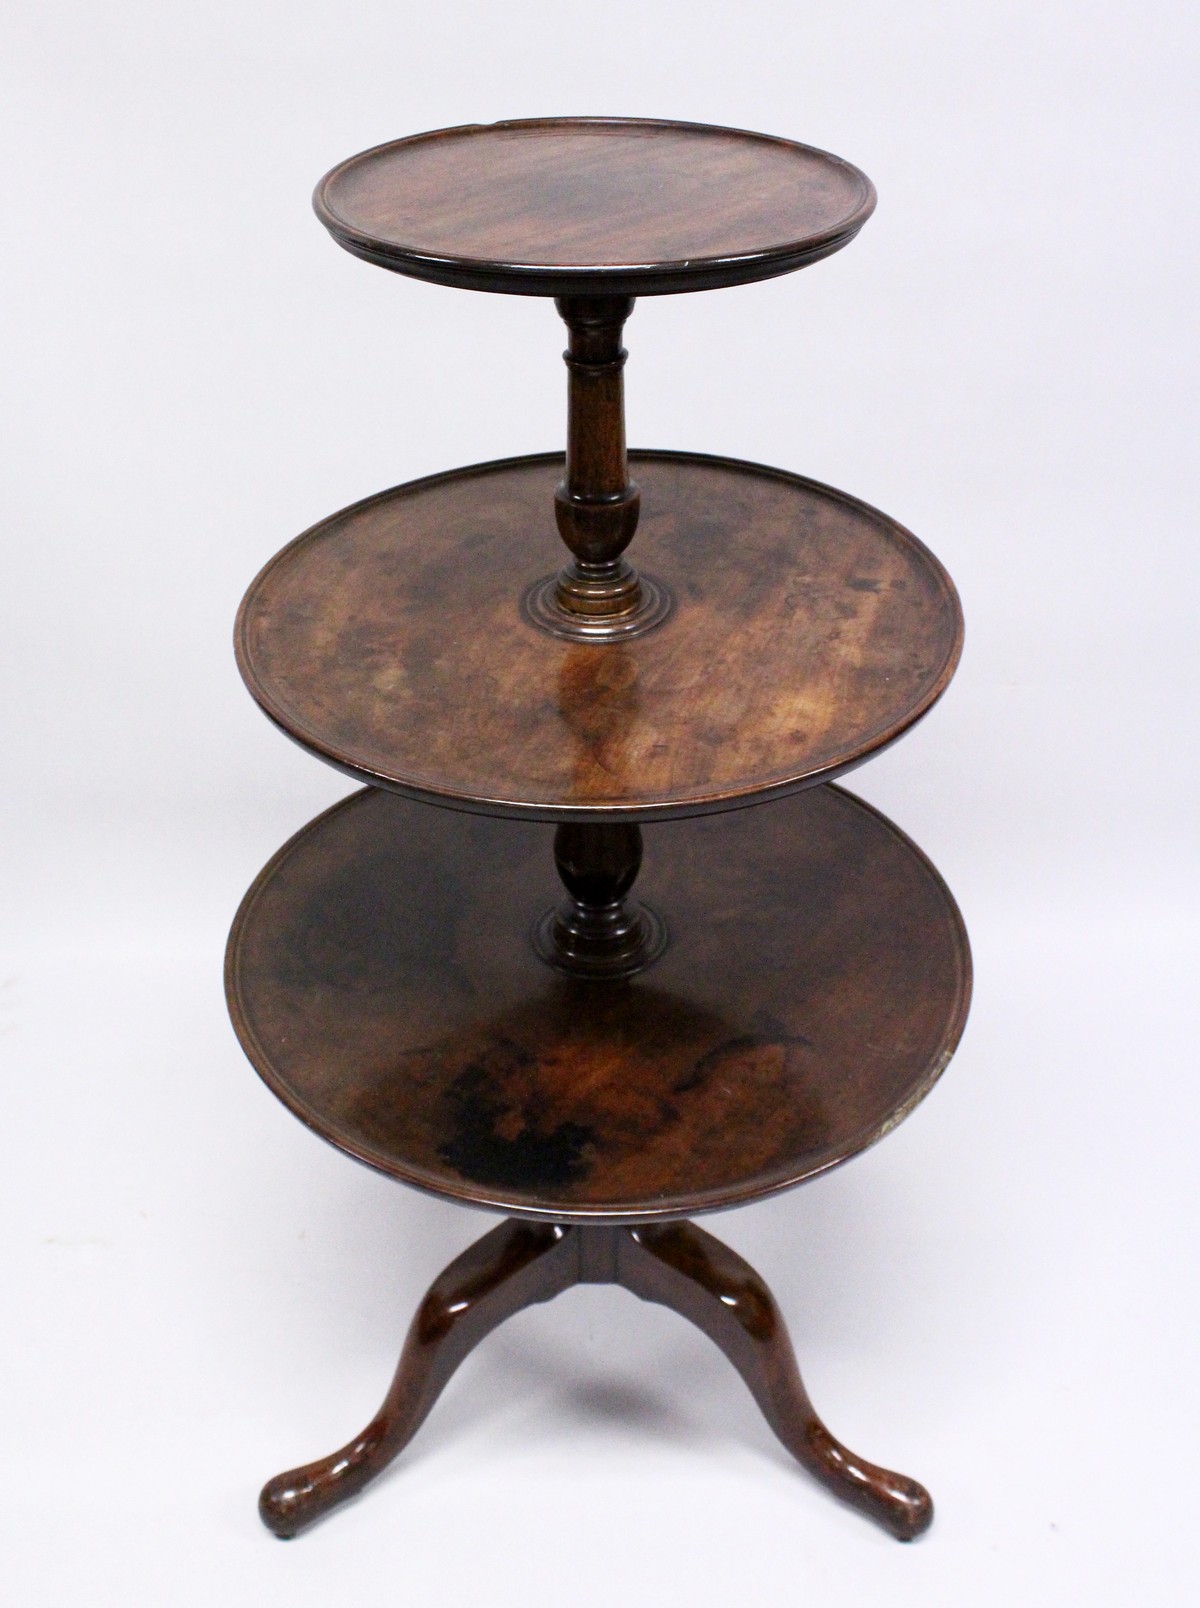 A GEORGE III MAHOGANY THREE-TIER DUMB WAITER, with central turned support, tripod base ending in pad